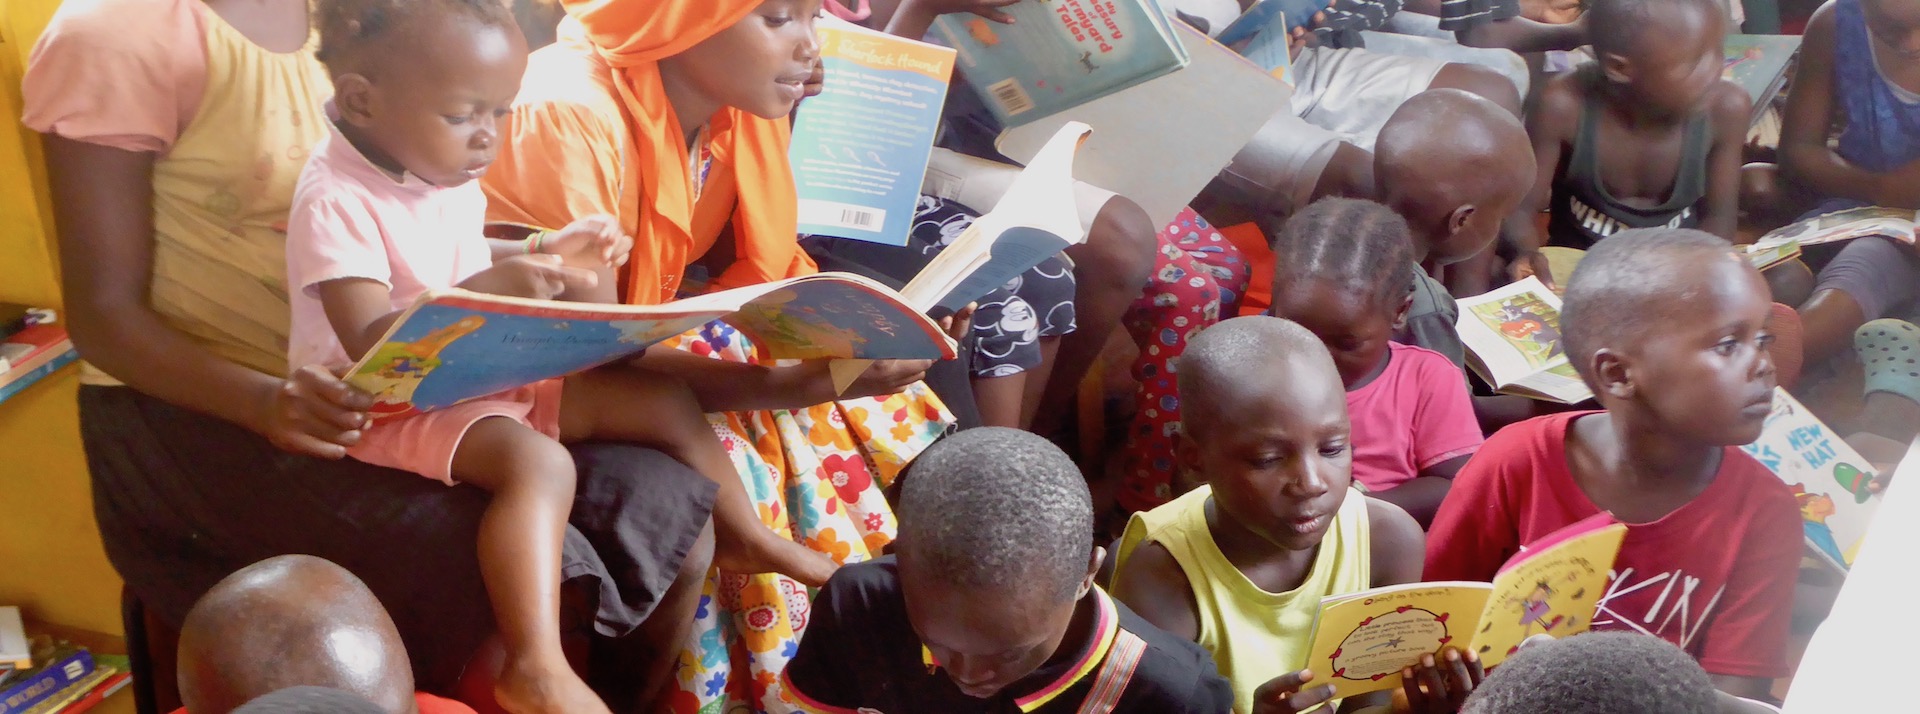 We support communities by building libraries and inspiring learning.